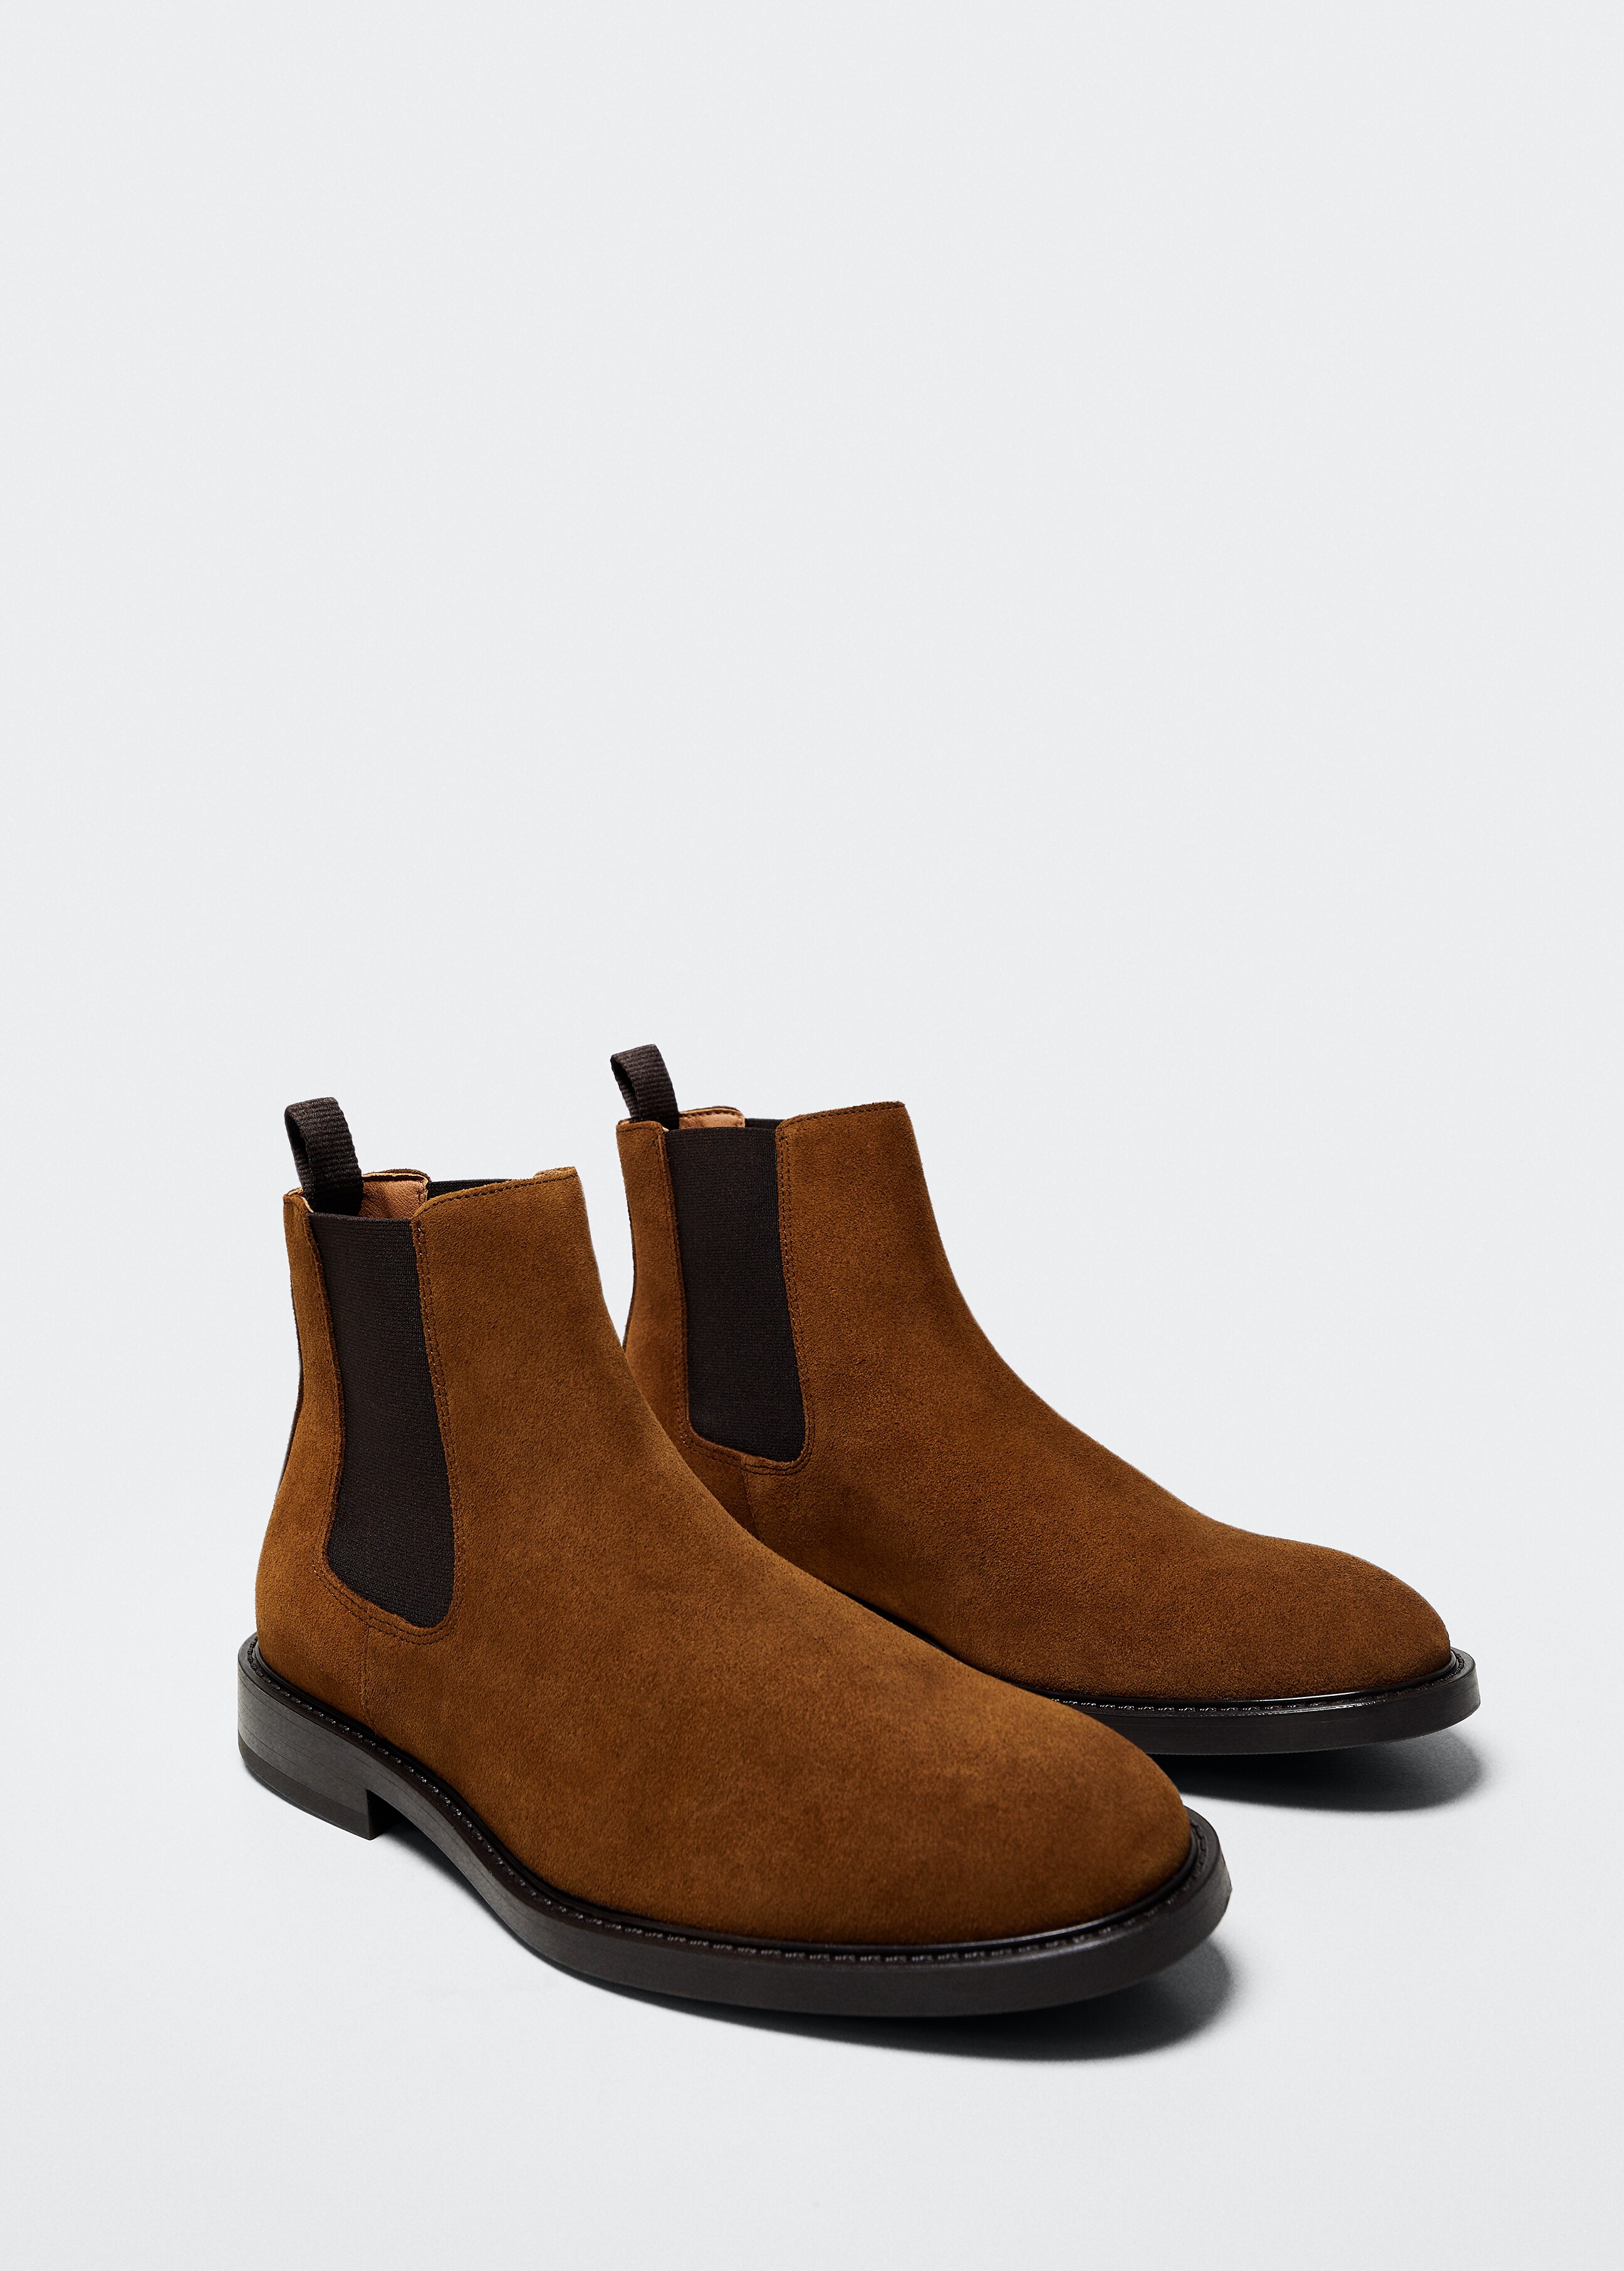 Suede Chelsea ankle boots - Medium plane